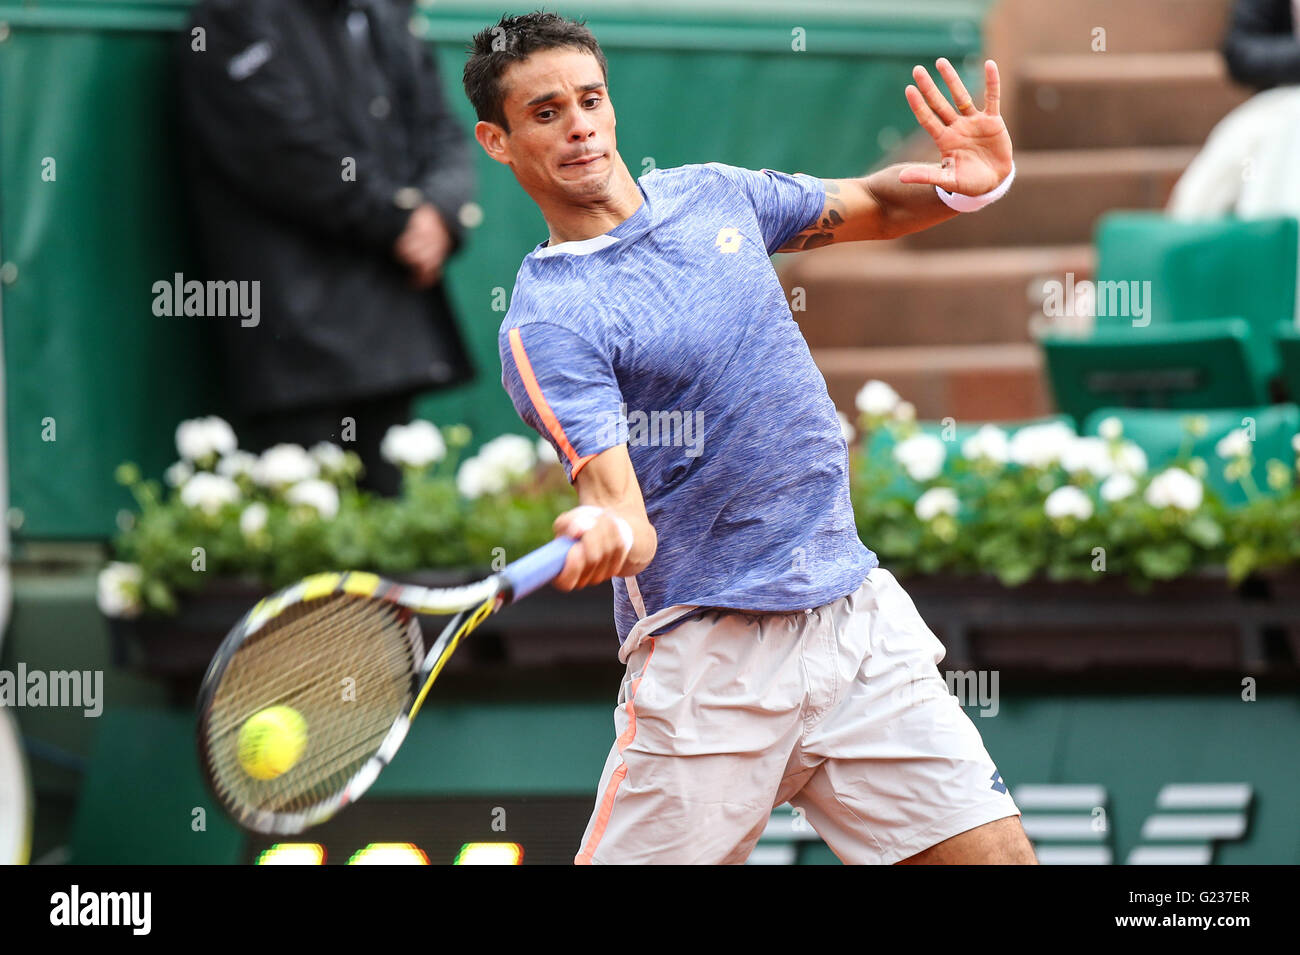 PARIS, FRANCE - 05/22/2016: ROLAND GARROS 2016 - The Brazilian Rogerio Dutra Silva during the open tennis France in 2016 held at the Stade Roland Garros. (Photo: Andre Chaco / FotoArena) Stock Photo